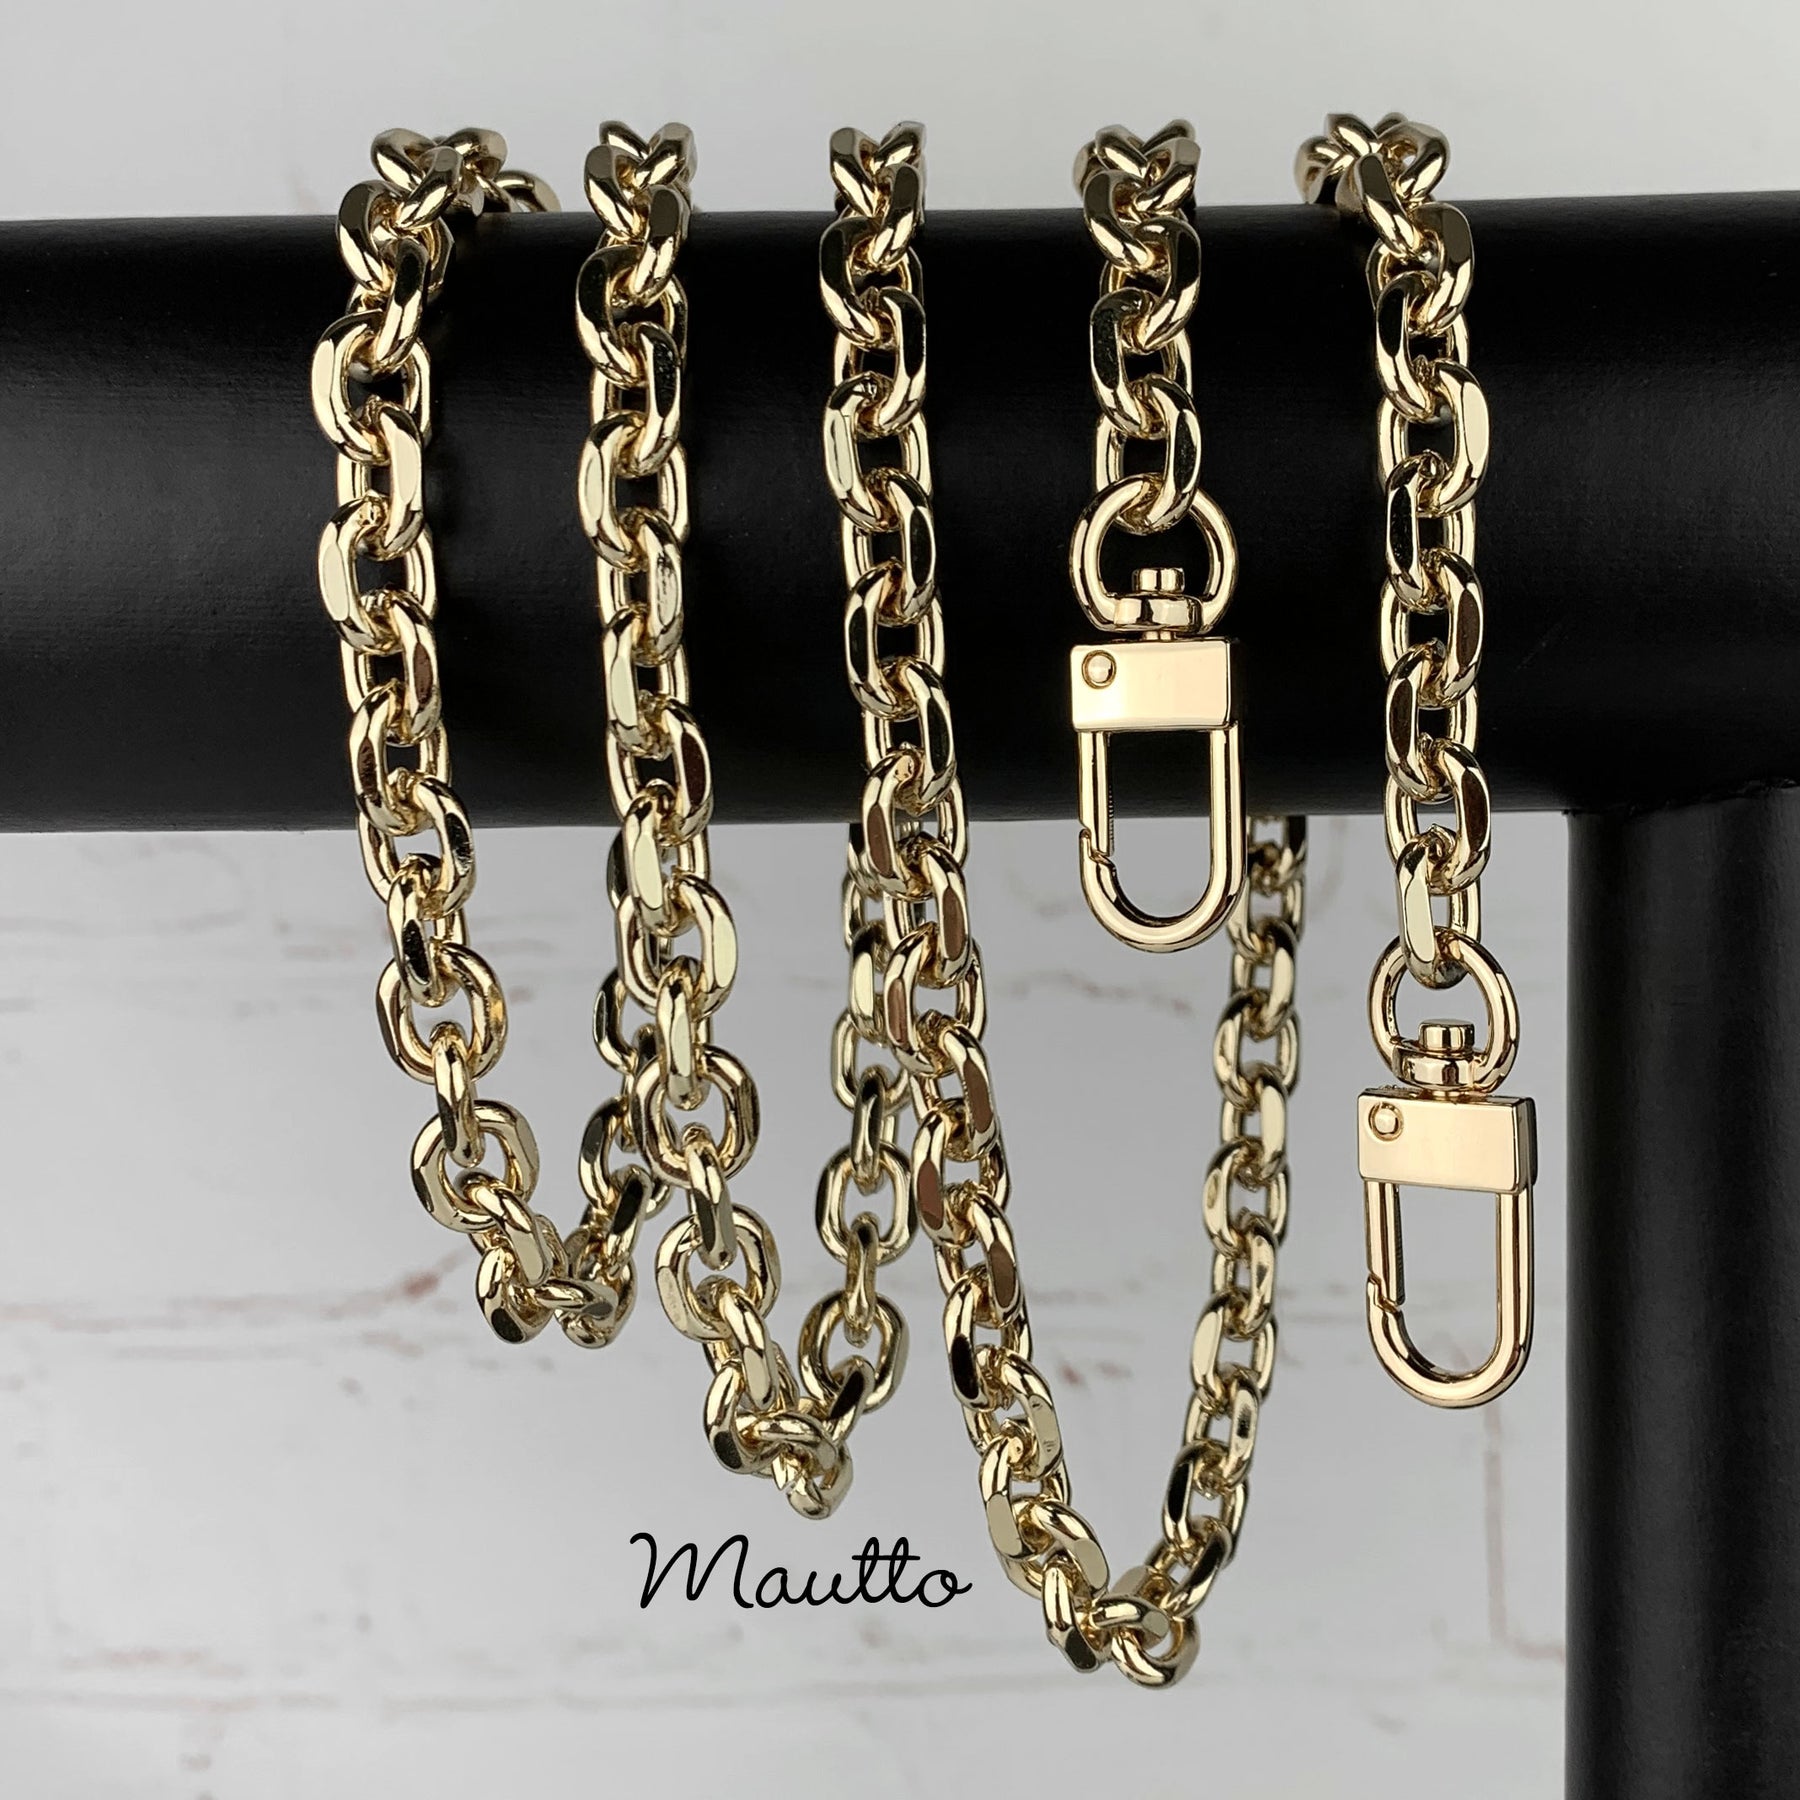 Mautto Rolo Link Chain Strap - Light Gold Luxury Strap for Purses & Handbags 50 Crossbody / none; Chain Only